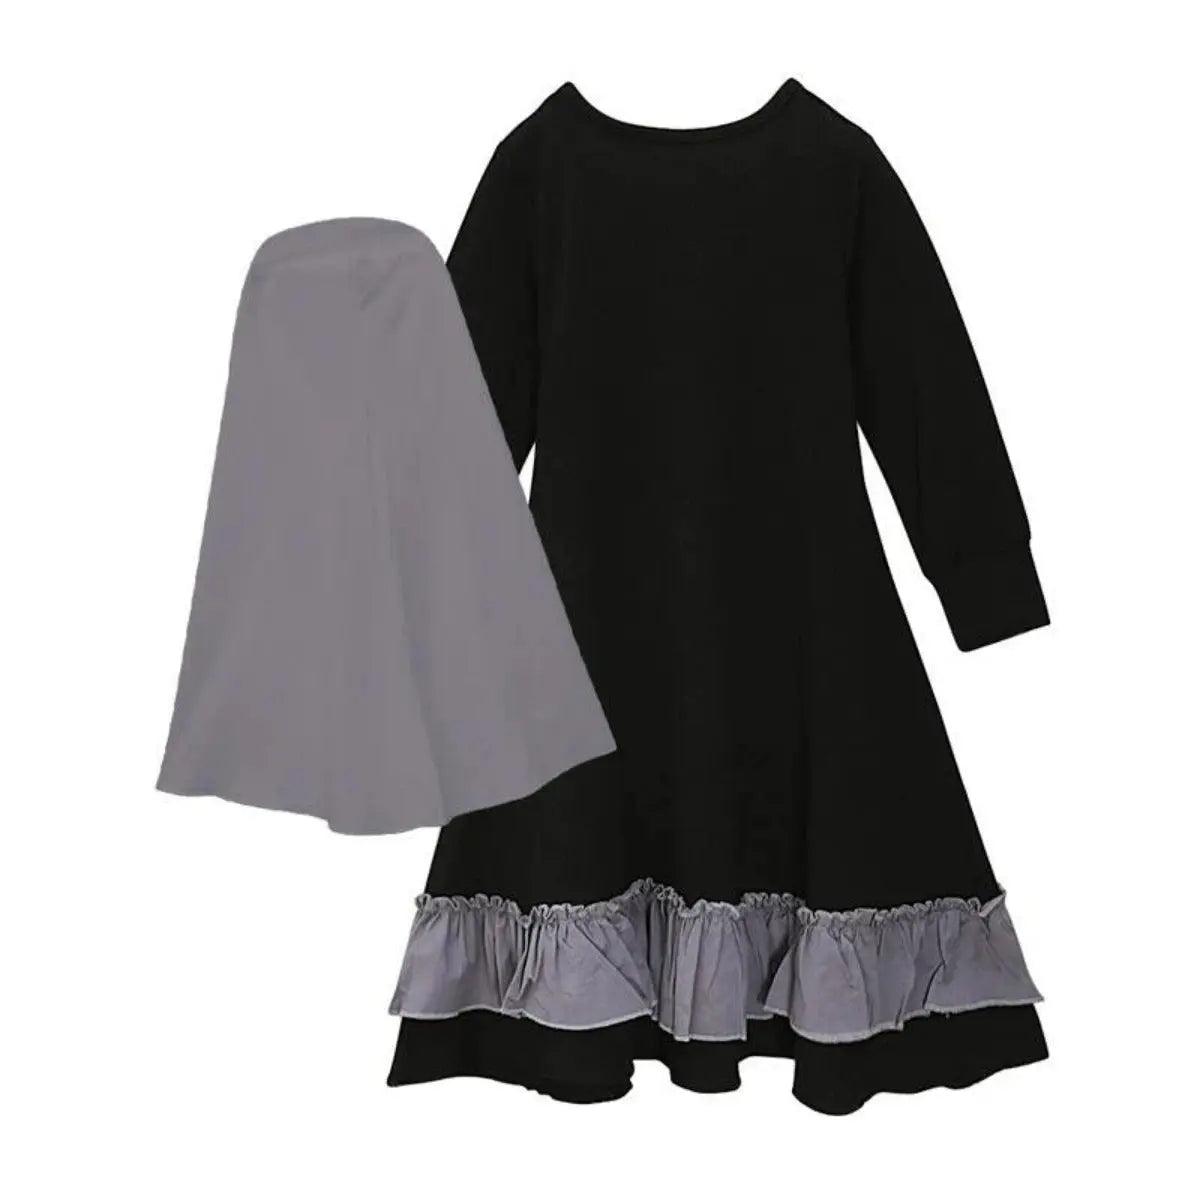 MJ014 Black Two Piece Kids Jlibab With Bow Tie Mariam's Collection